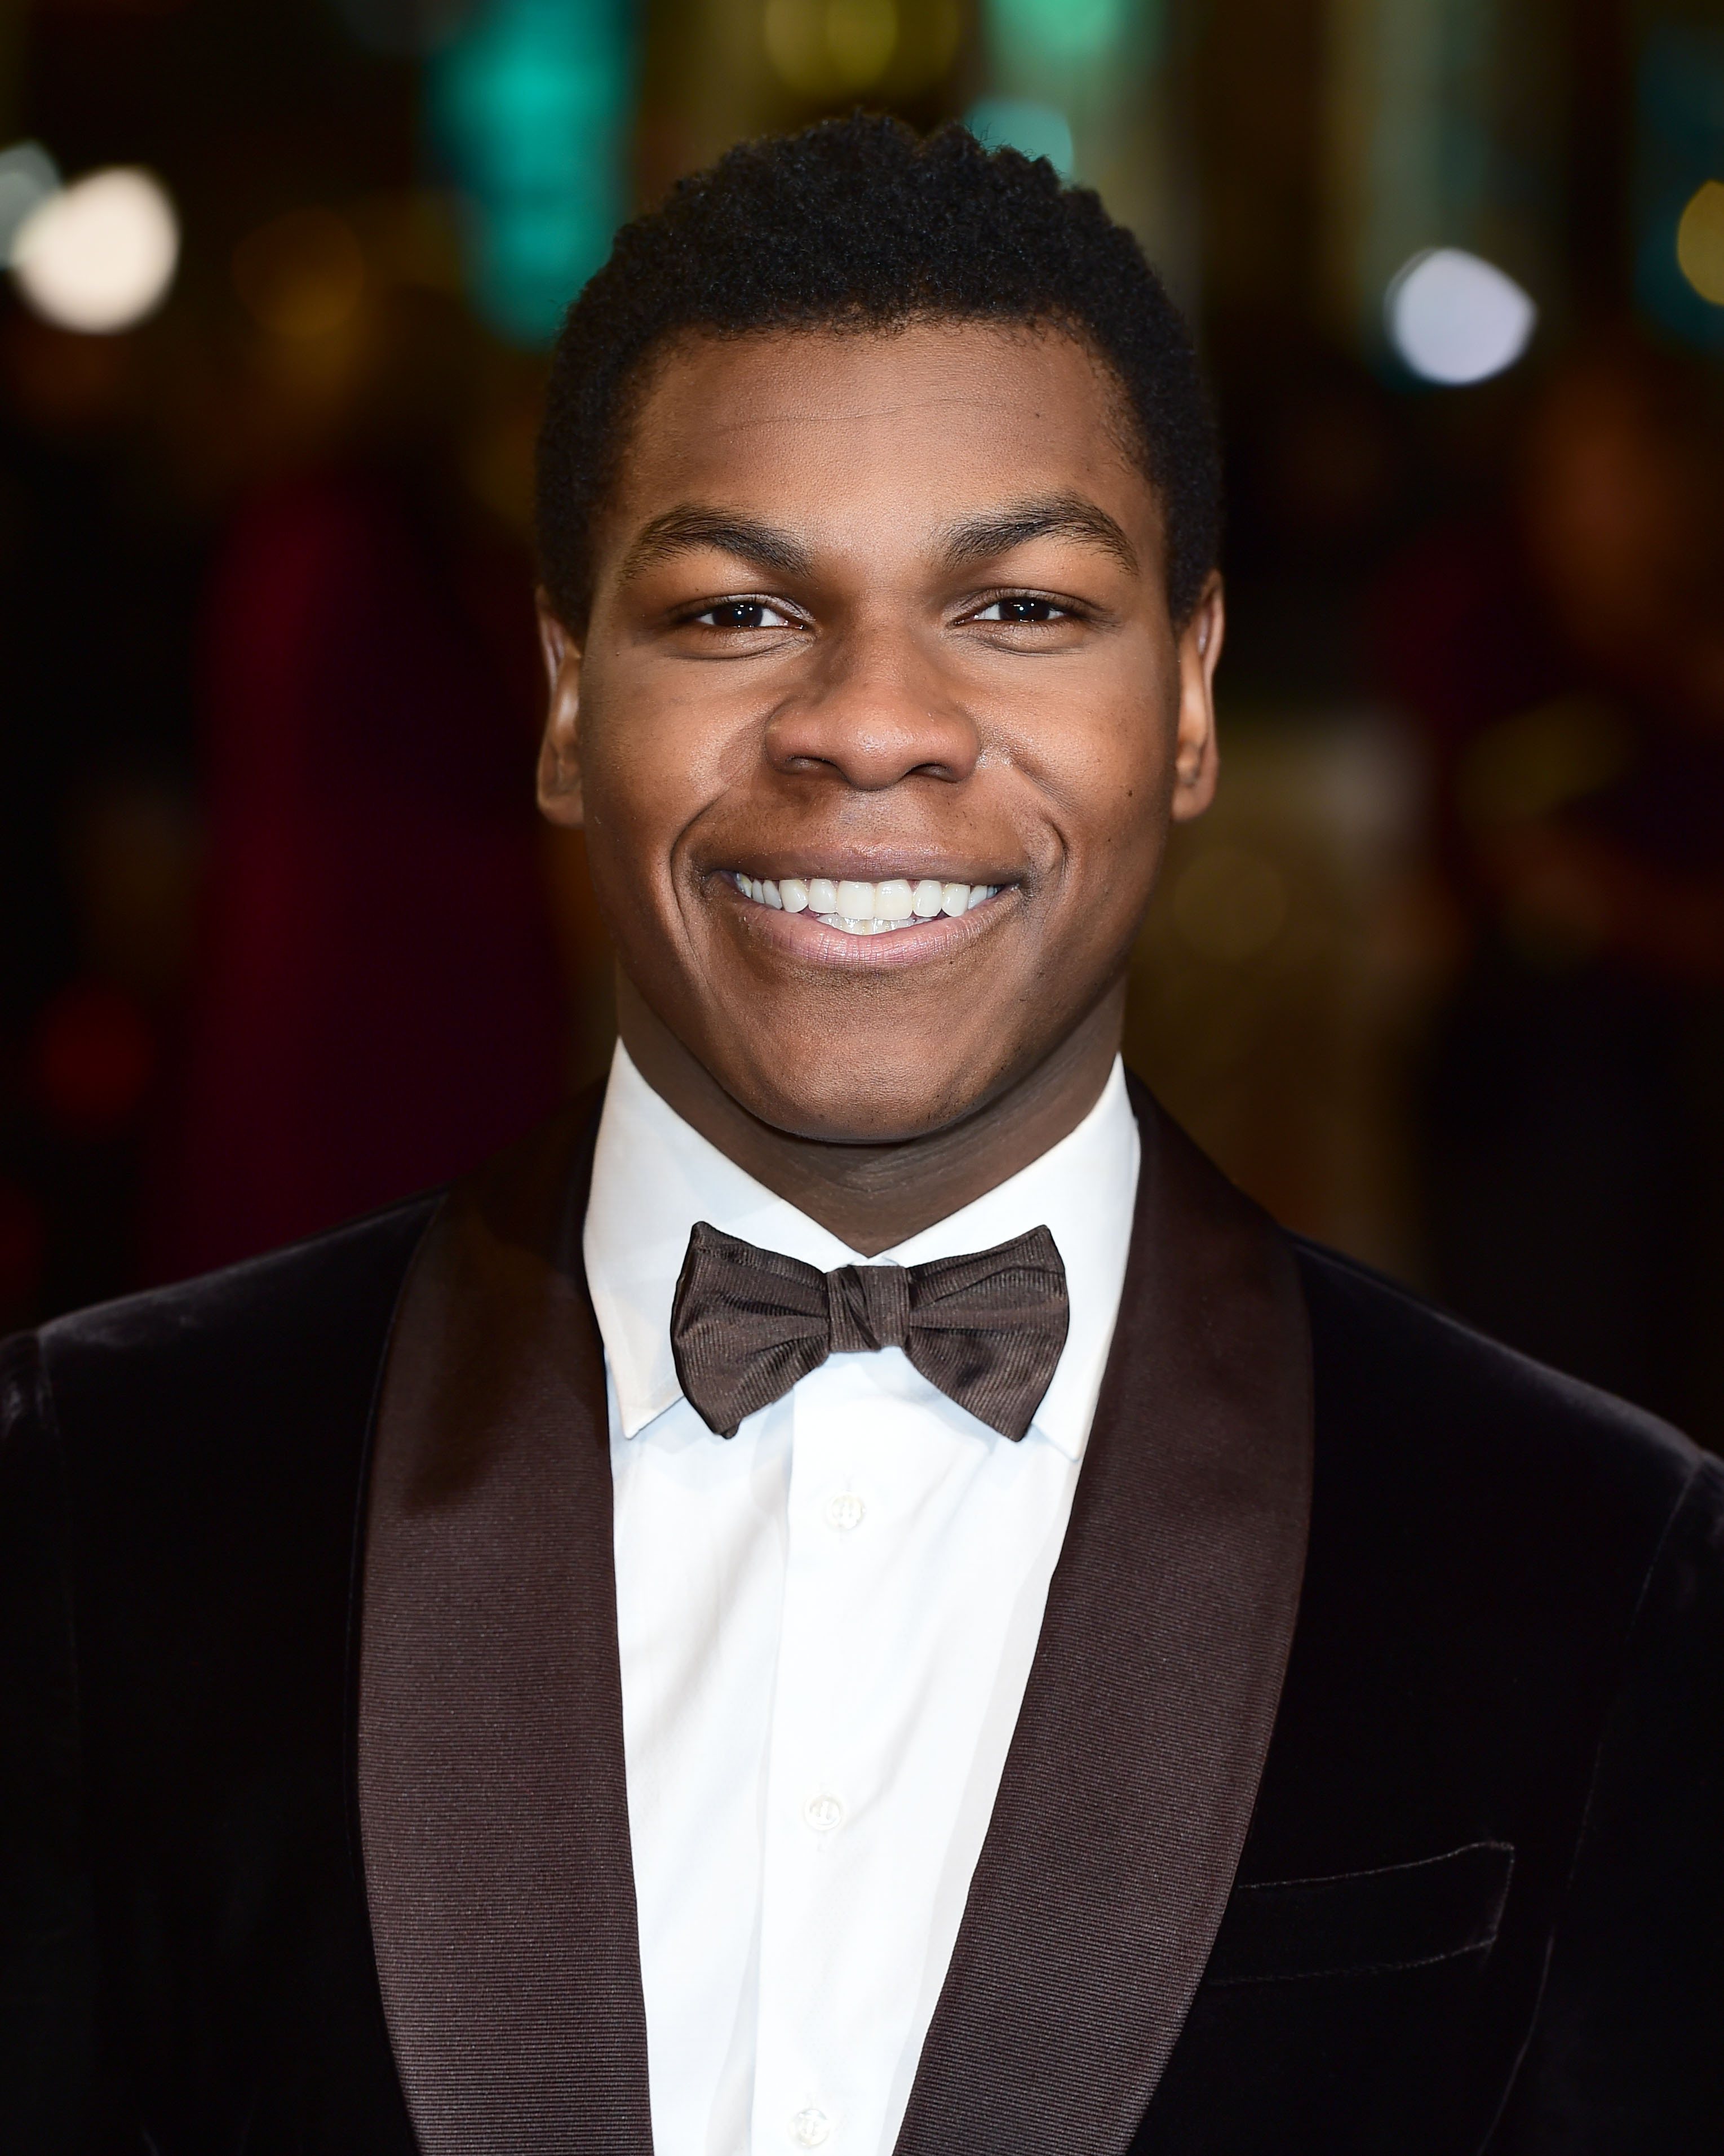 John Boyega revealed that he found a much-coveted Pikachu when filming Star Wars: Episode VIII. (Ian West—PA Wire/Press Association Images)